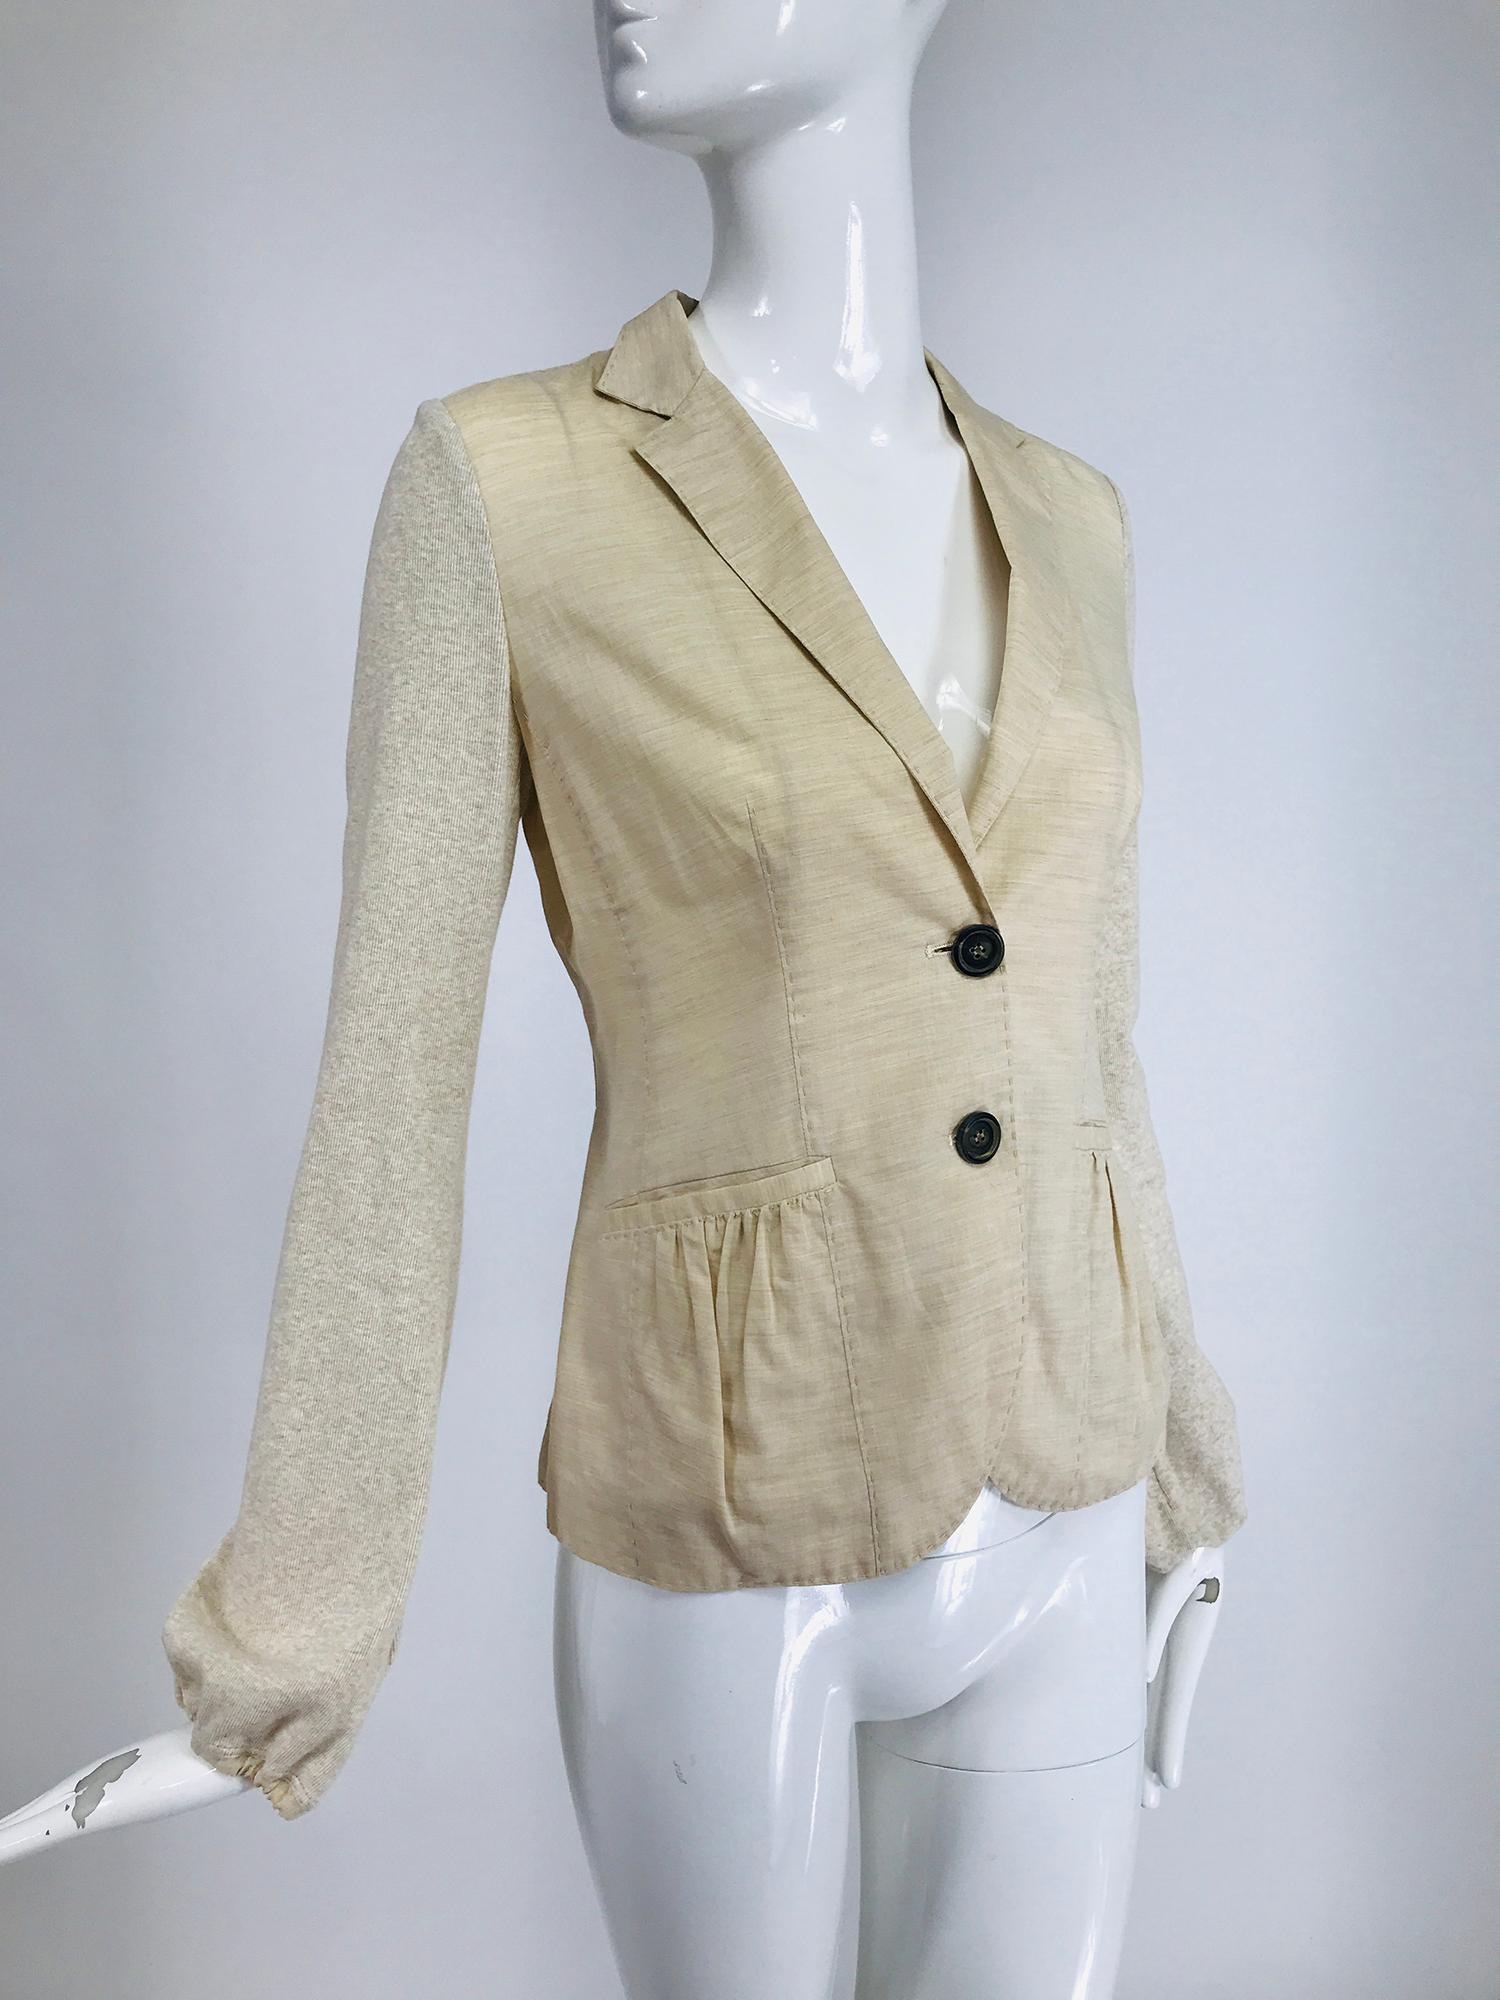 Brunello Cucinelli cream cotton & linen, fabric & knit button front jacket marked XS. Single breasted jacket  closes at the front with buttons, V neckline with narrow lapel collar. There are two hip front bellows pockets. The jacket is linen/cotton